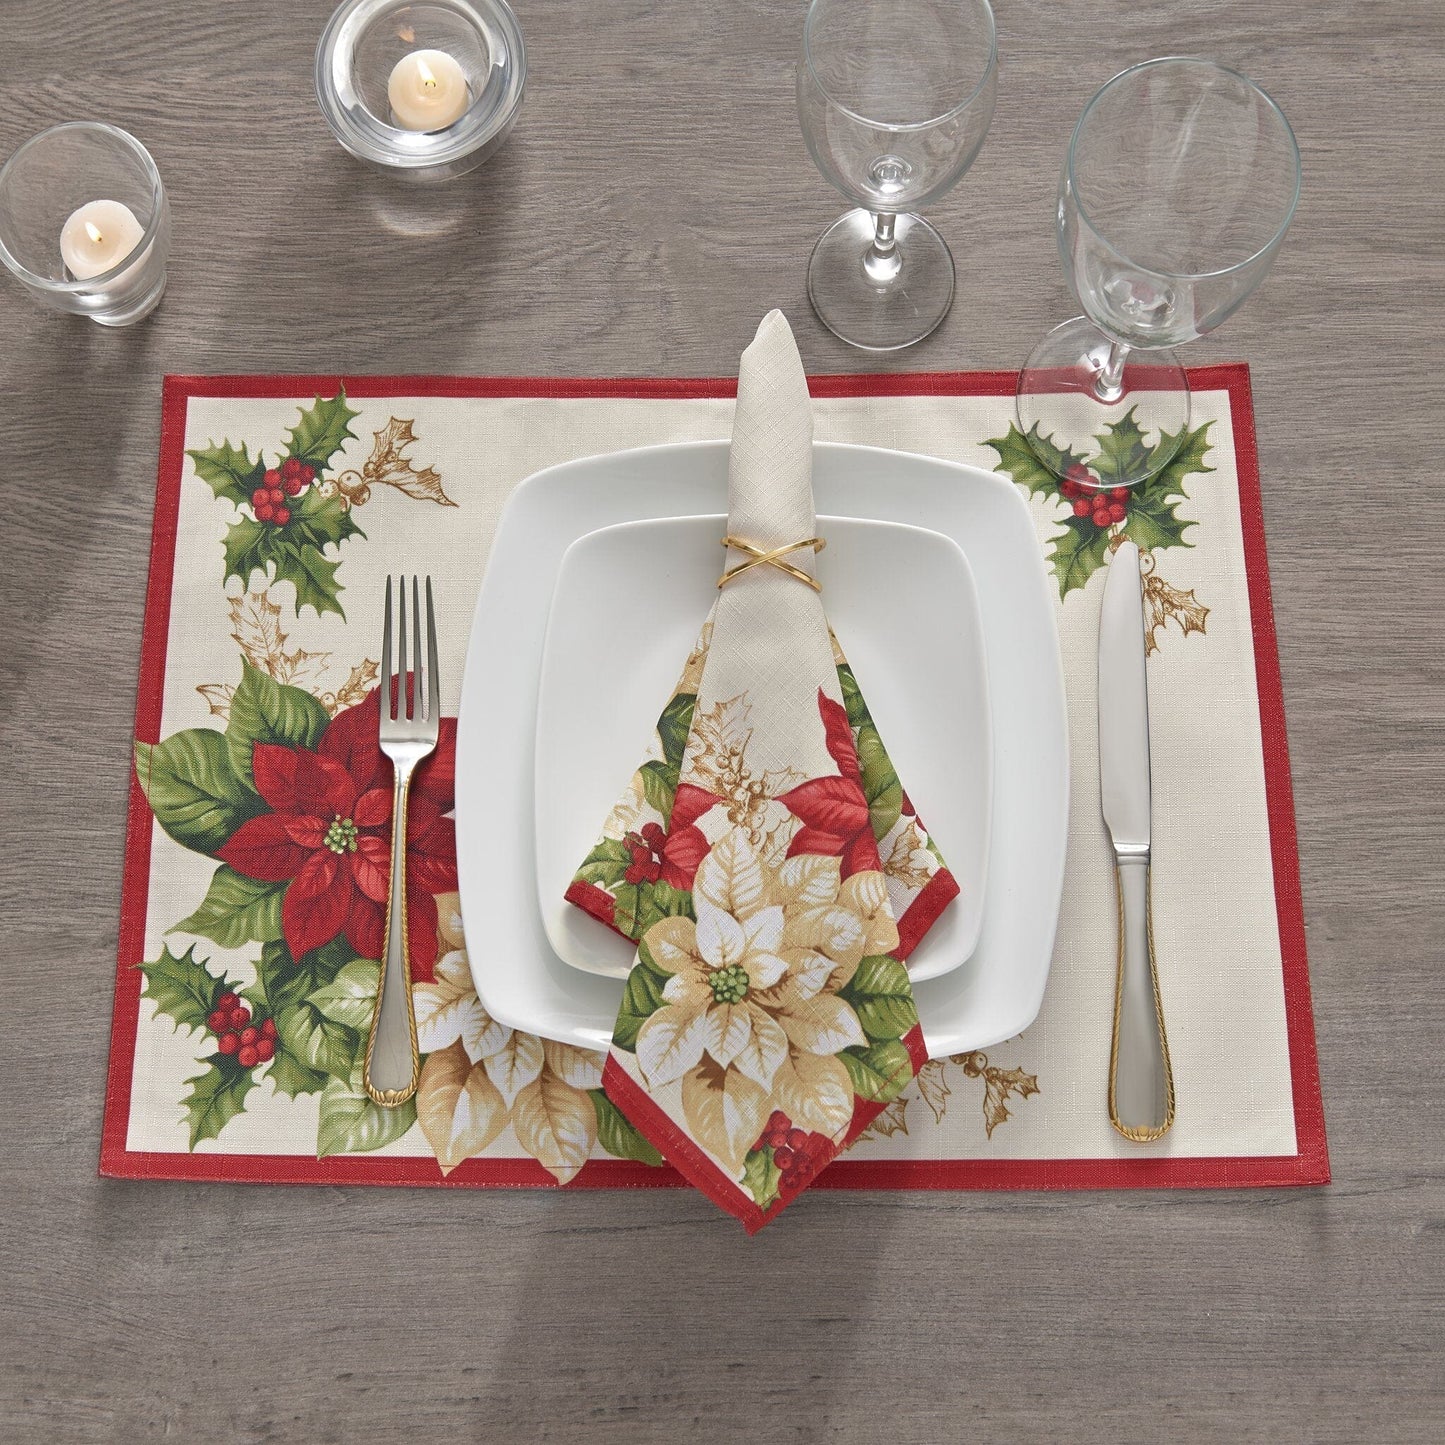 Red and White Poinsettias Placemat, Set of 4